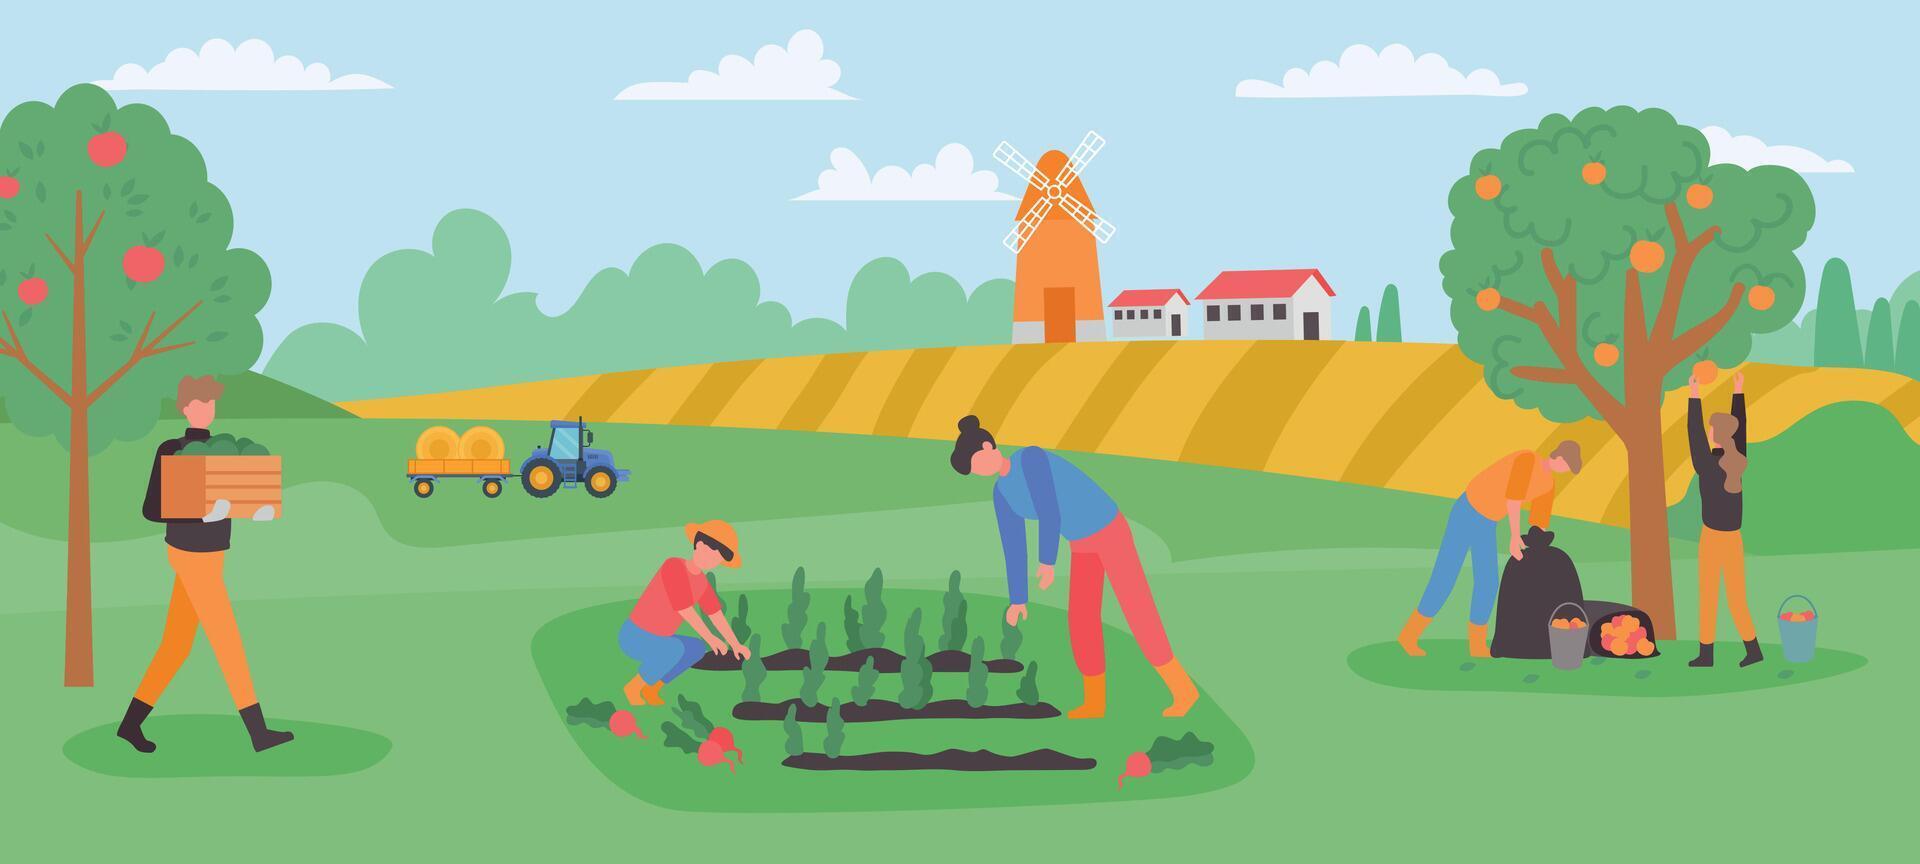 Autumn gathering, farmers collect harvest fruits and vegetables in garden vector